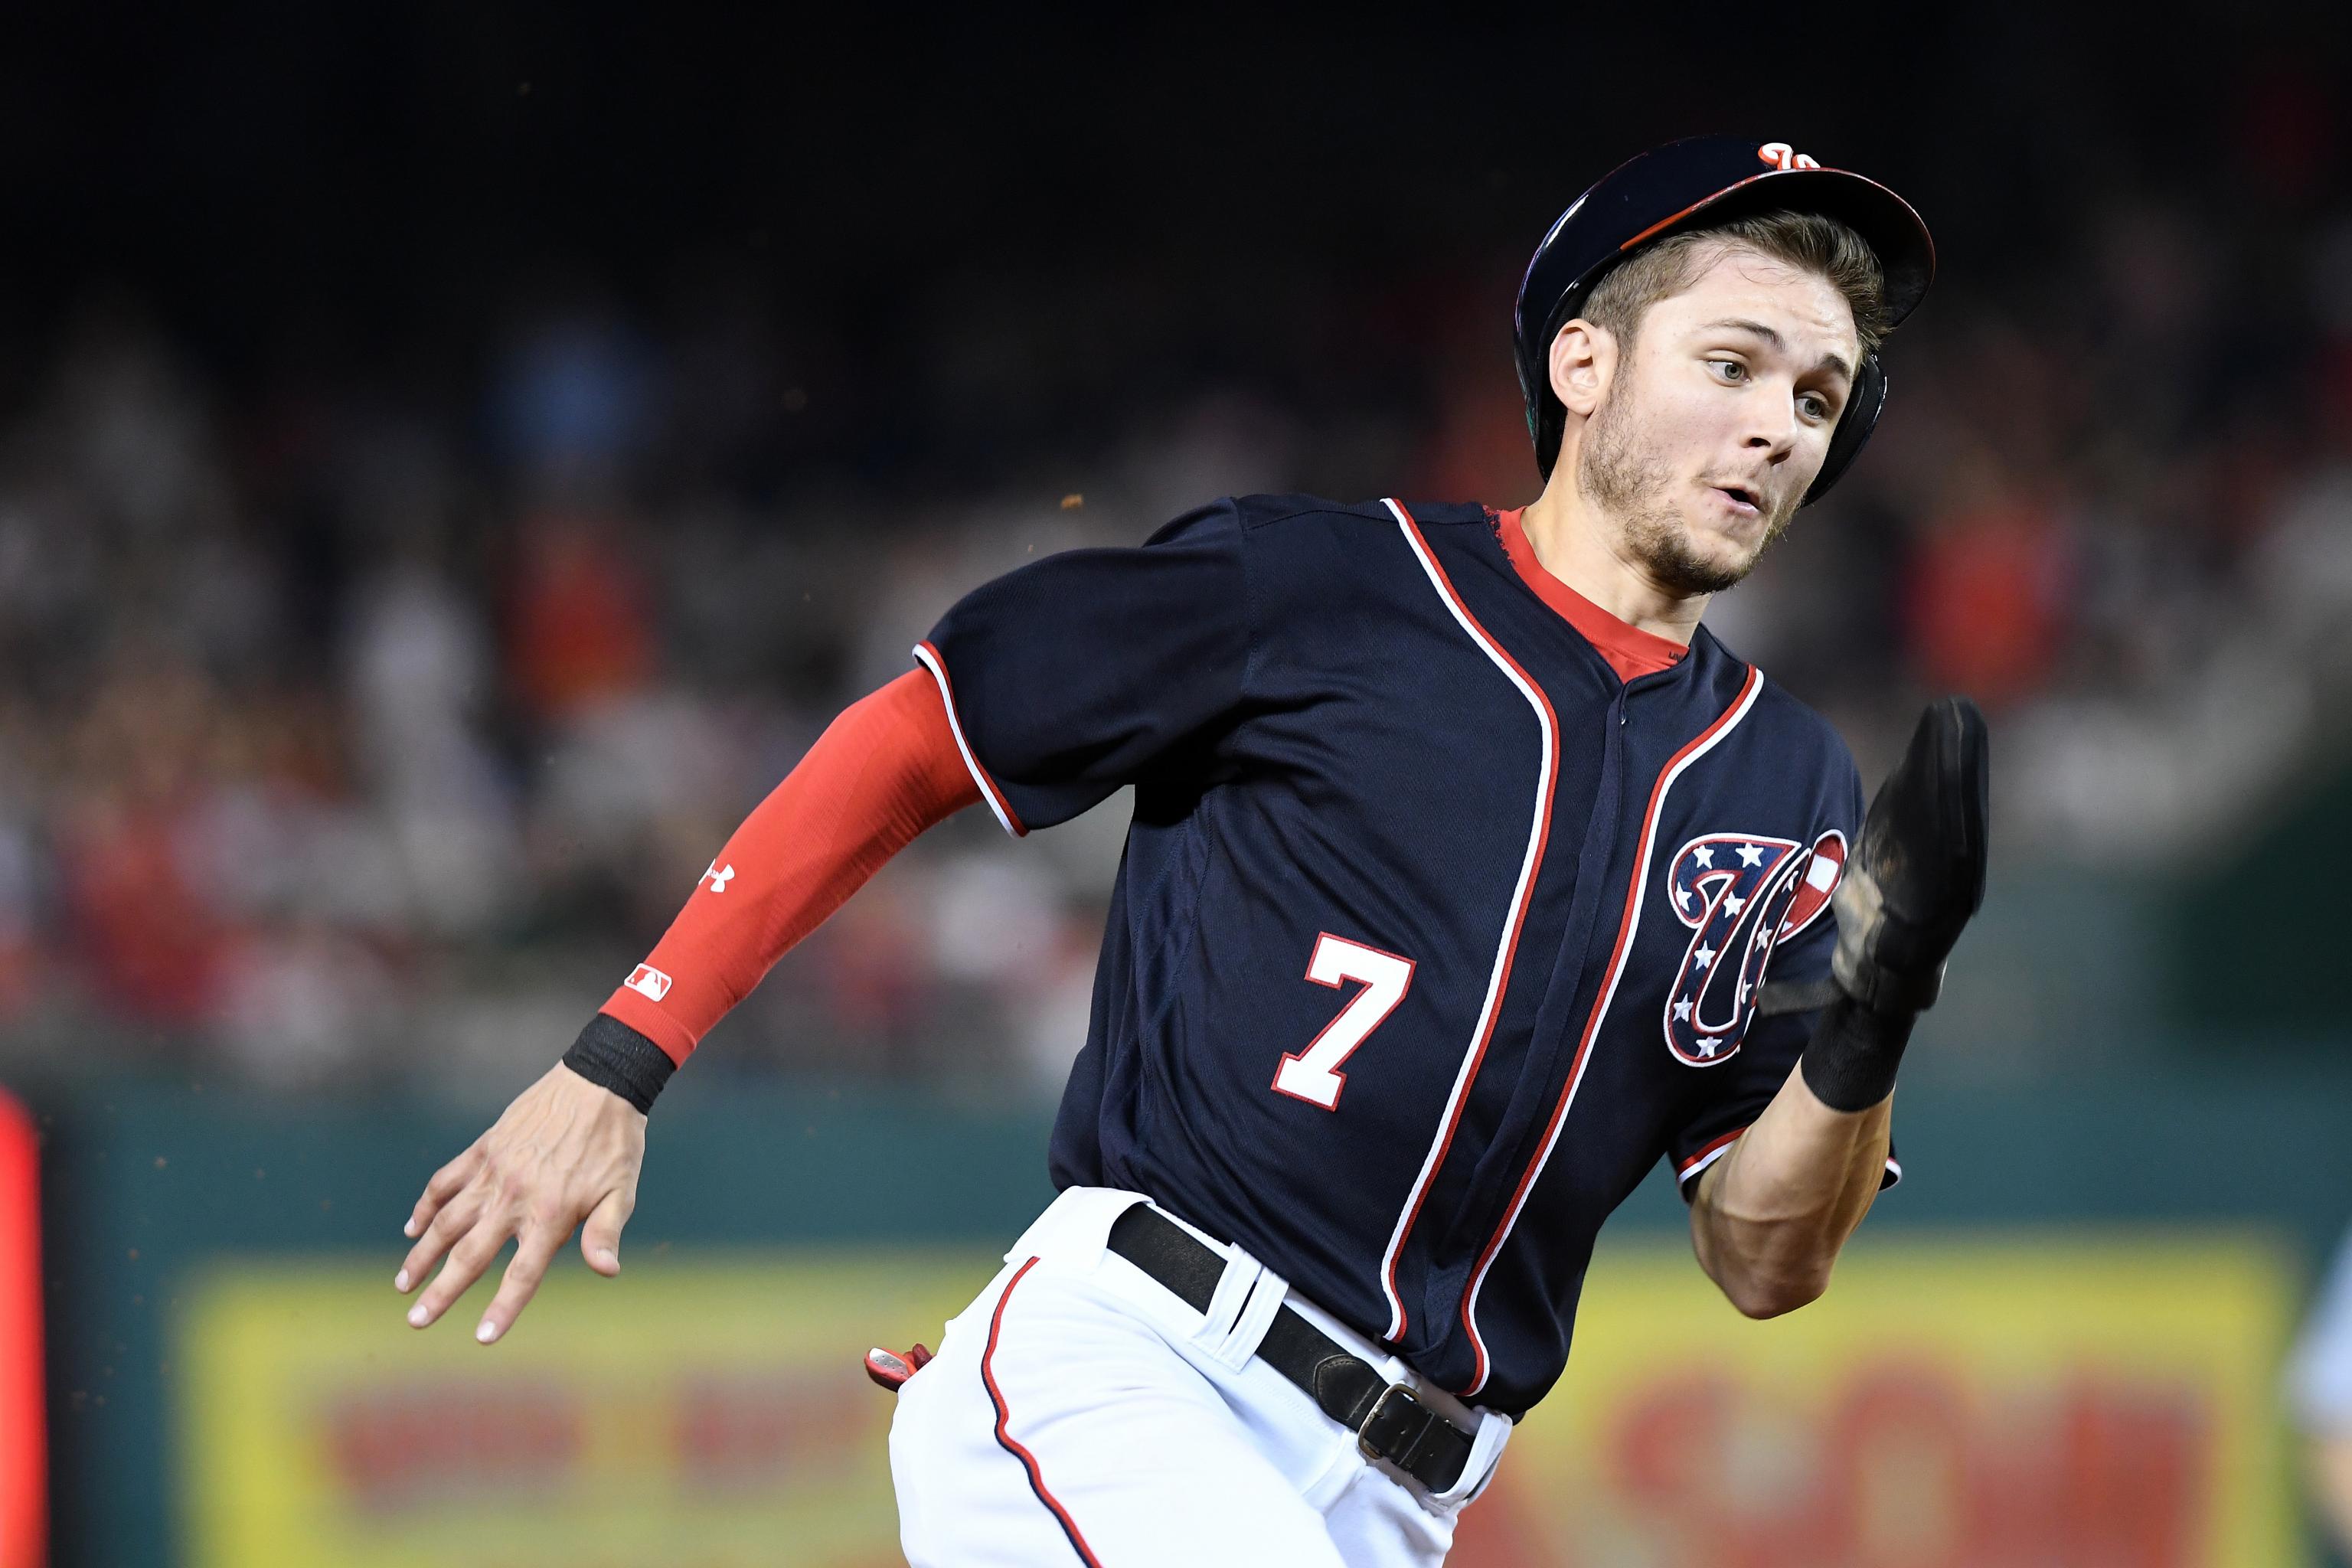 What Are Trea Turner's Physical Stats?